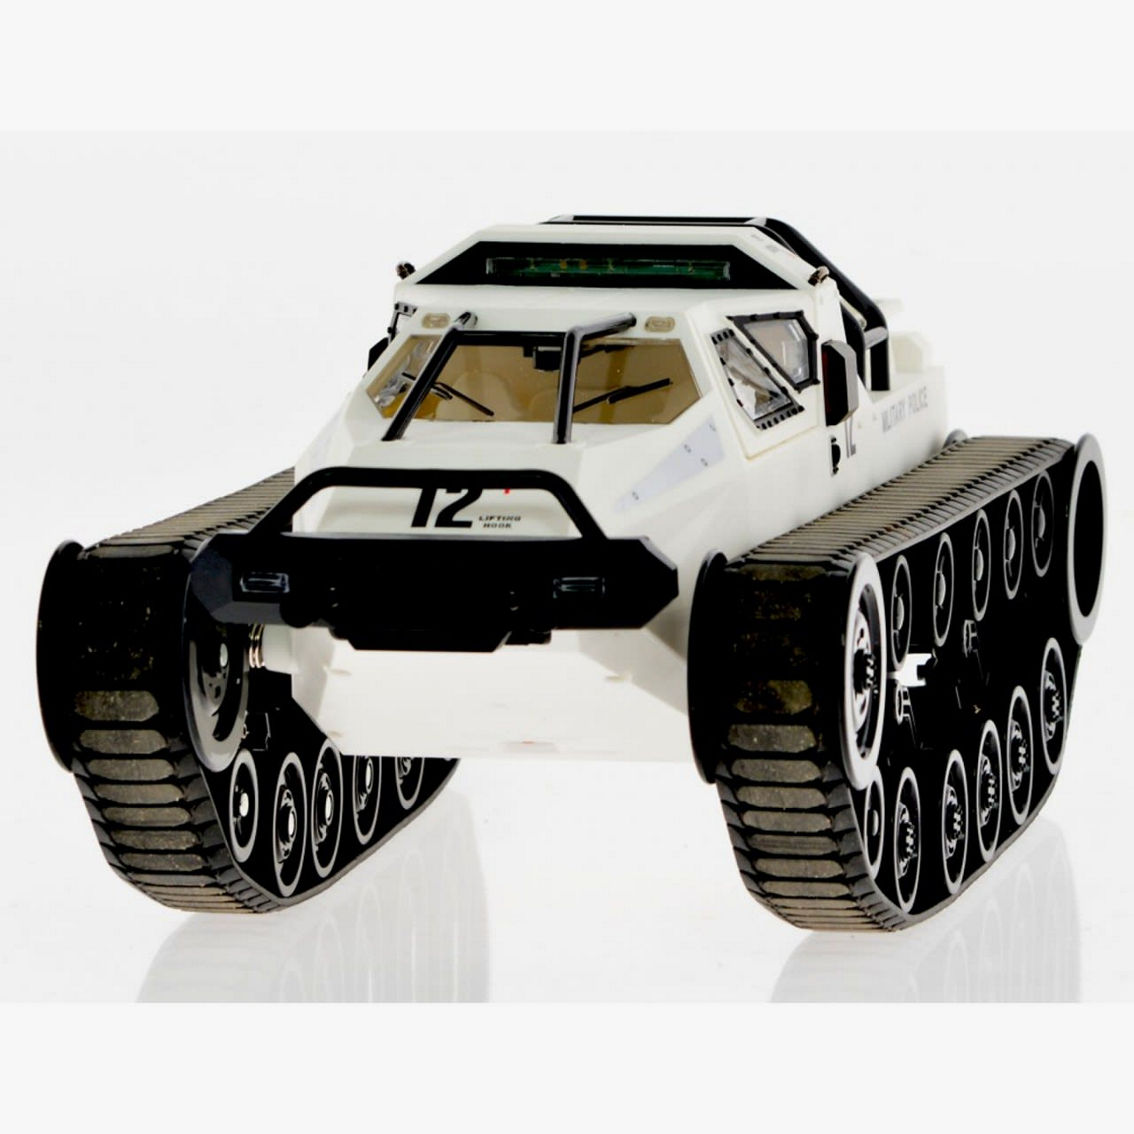 CIS-2601-G Ripsaw tank with top lights  - Gray - Image 4 of 5